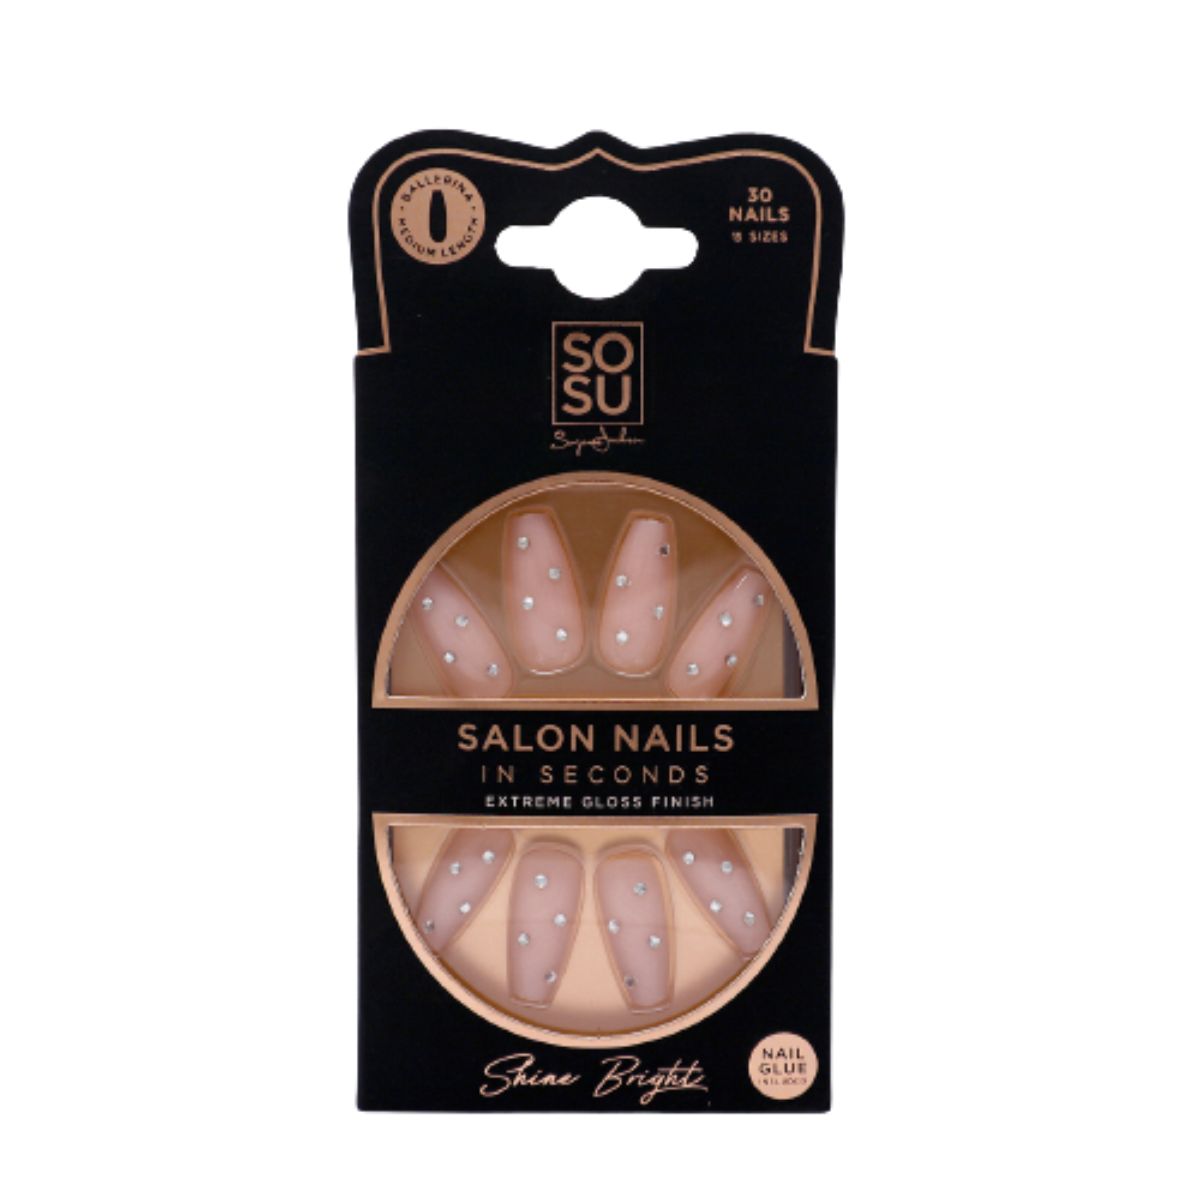 SOSU Cosmetics Salon Nails in Seconds with Nail Glue